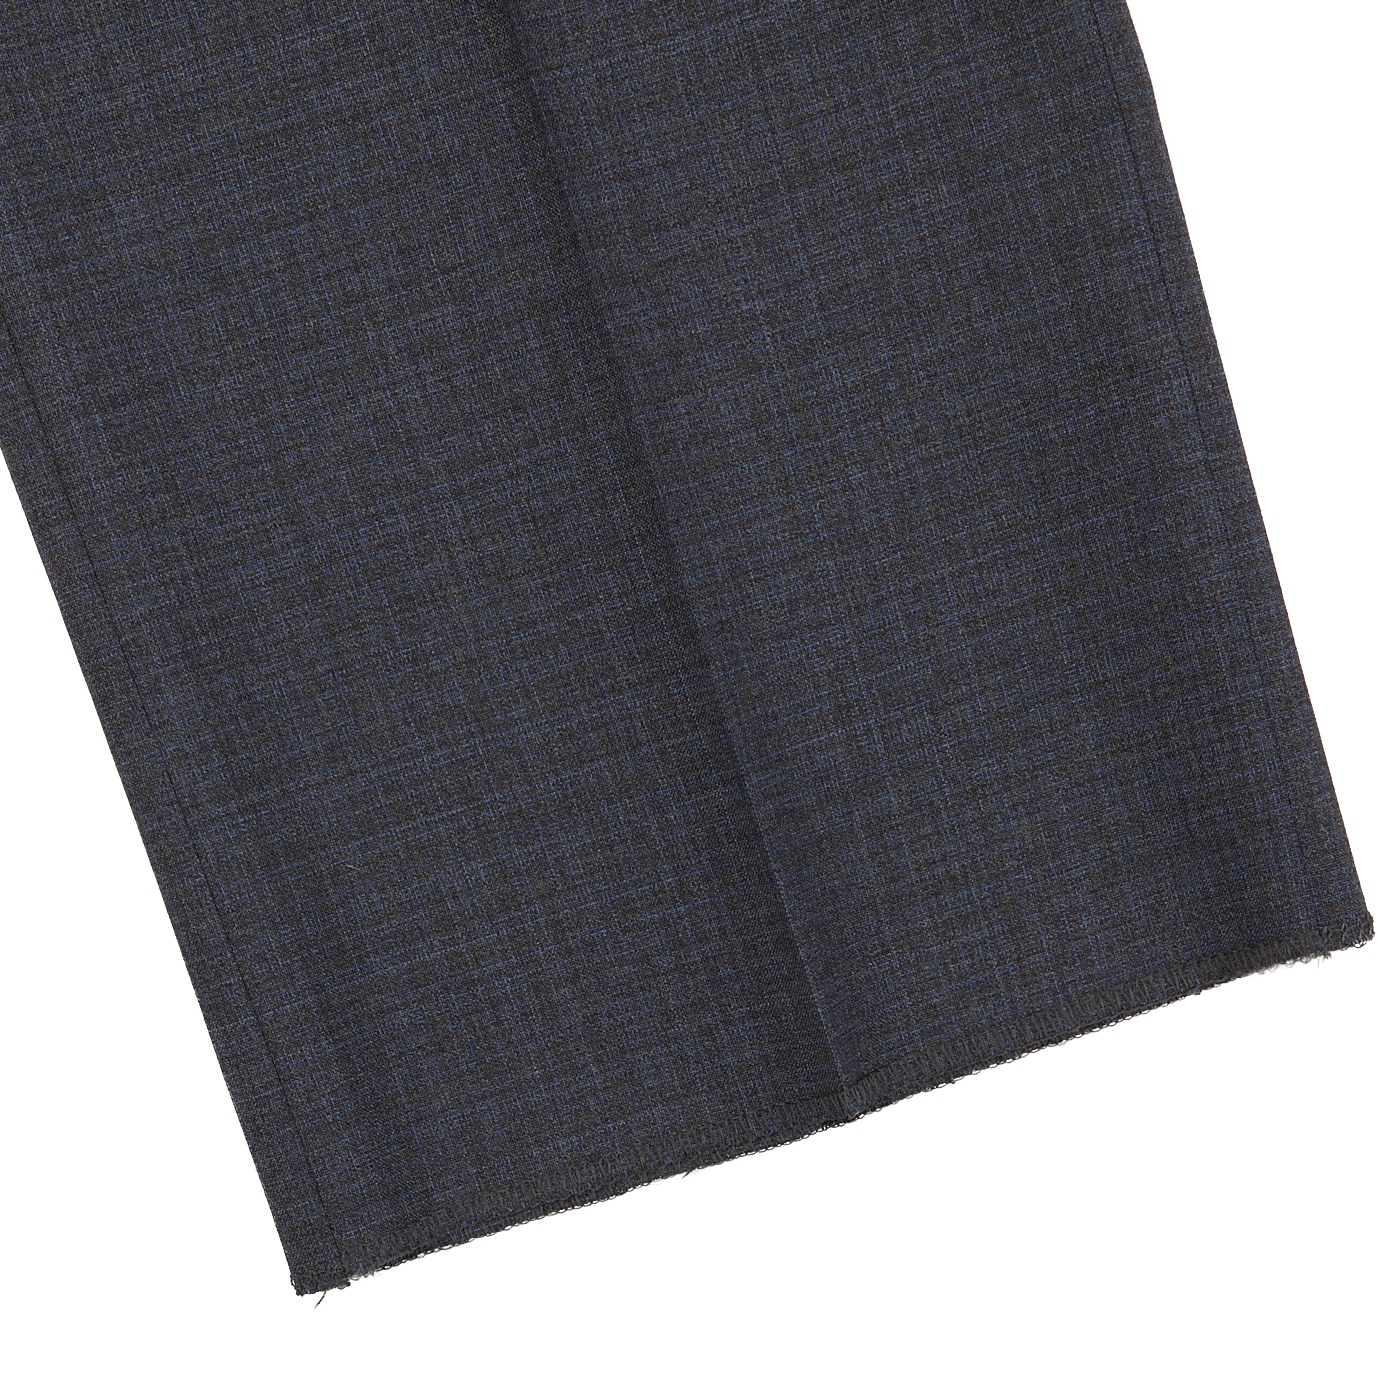 Folded grey-blue melange wool Canali suit fabric with a subtle texture, displayed on a white background.